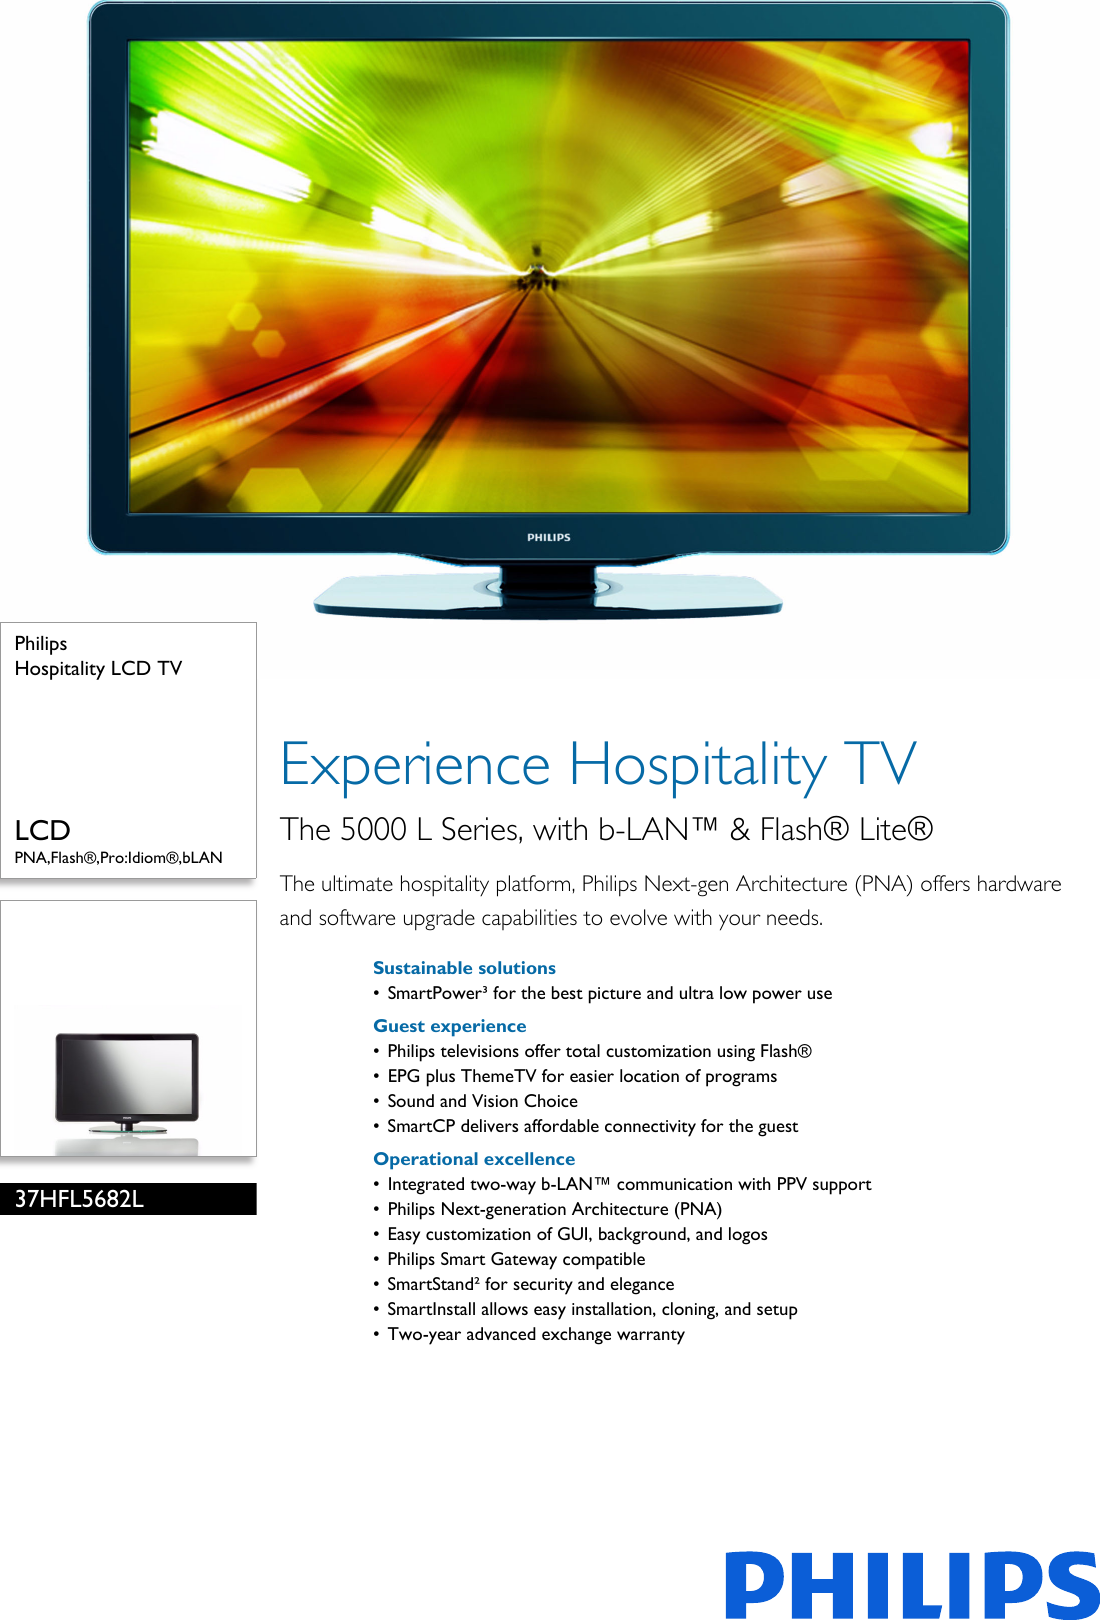 Page 1 of 3 - Philips 37HFL5682L/F7 Hospitality LCD TV User Manual Leaflet 37hfl5682l F7 Pss Aenus